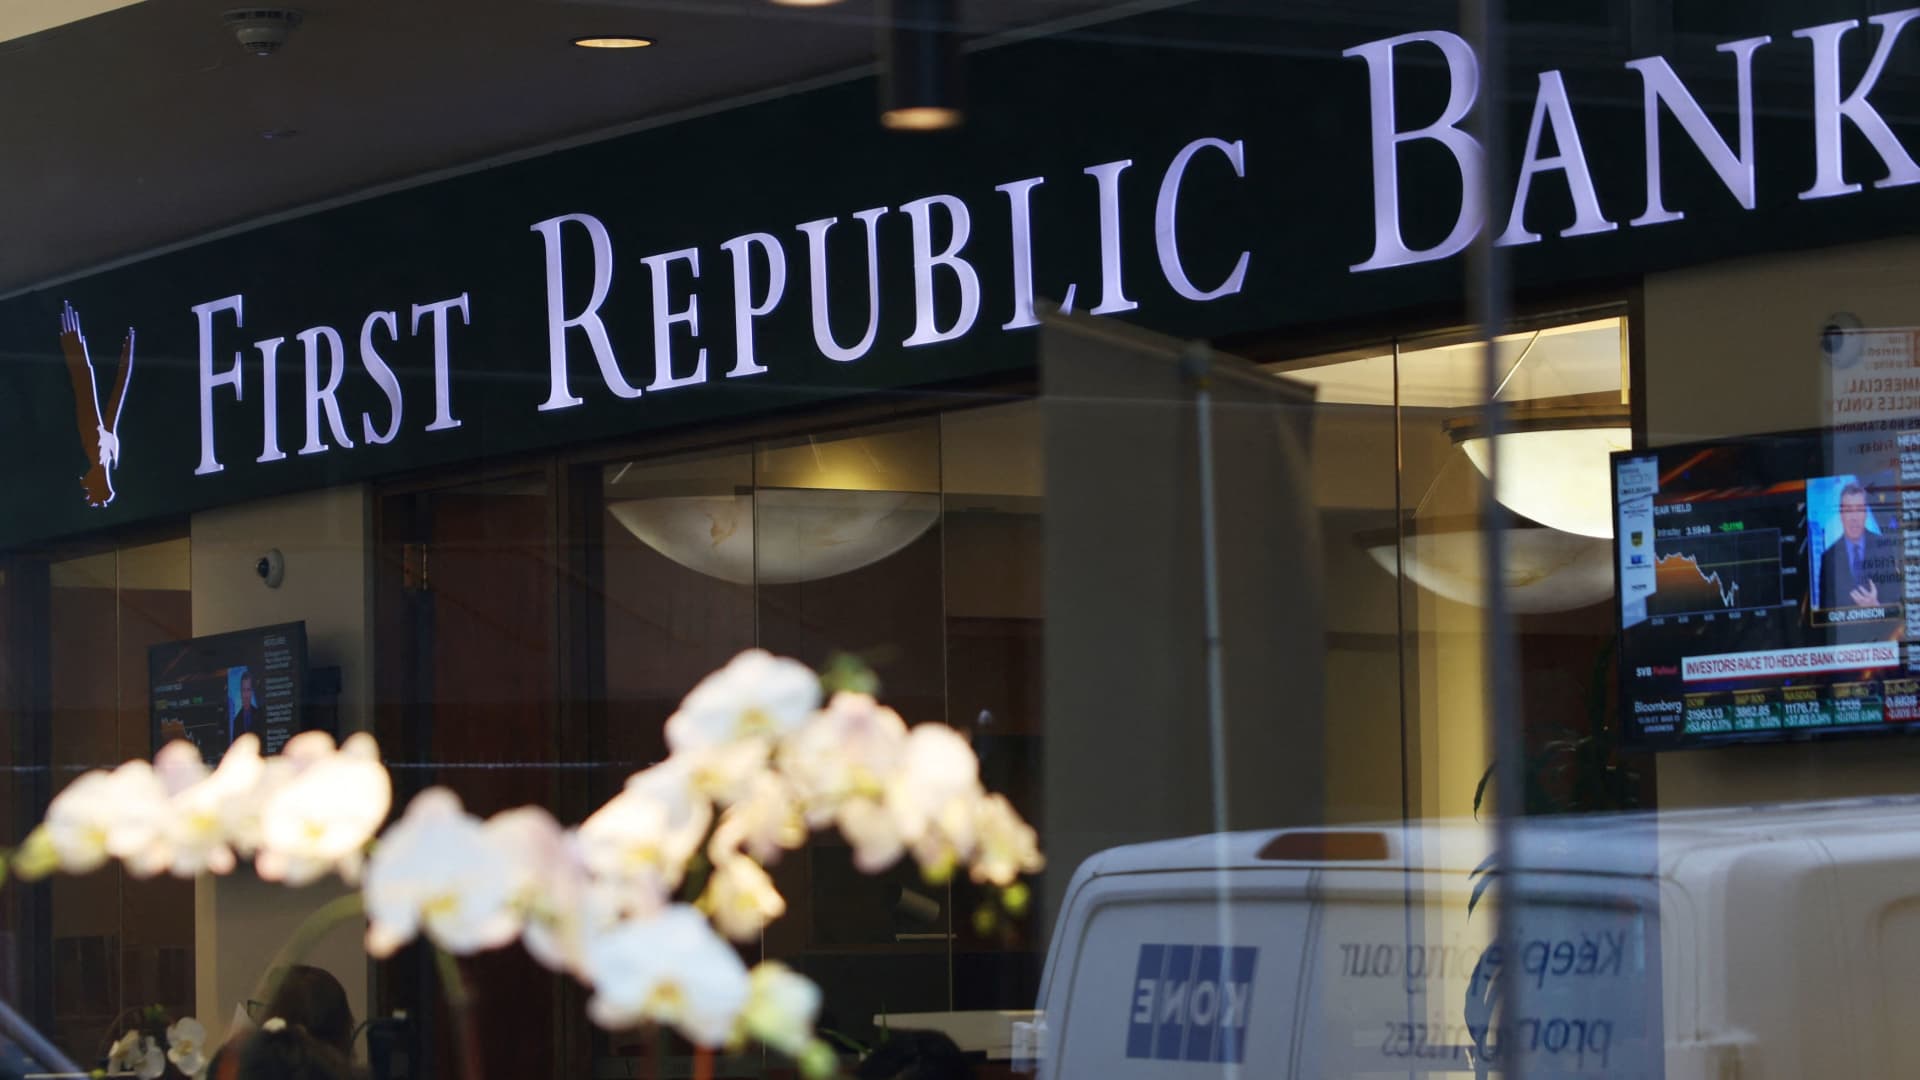 First Republic shares fall more than 20% despite deposit infusion, dragging down other regional banks